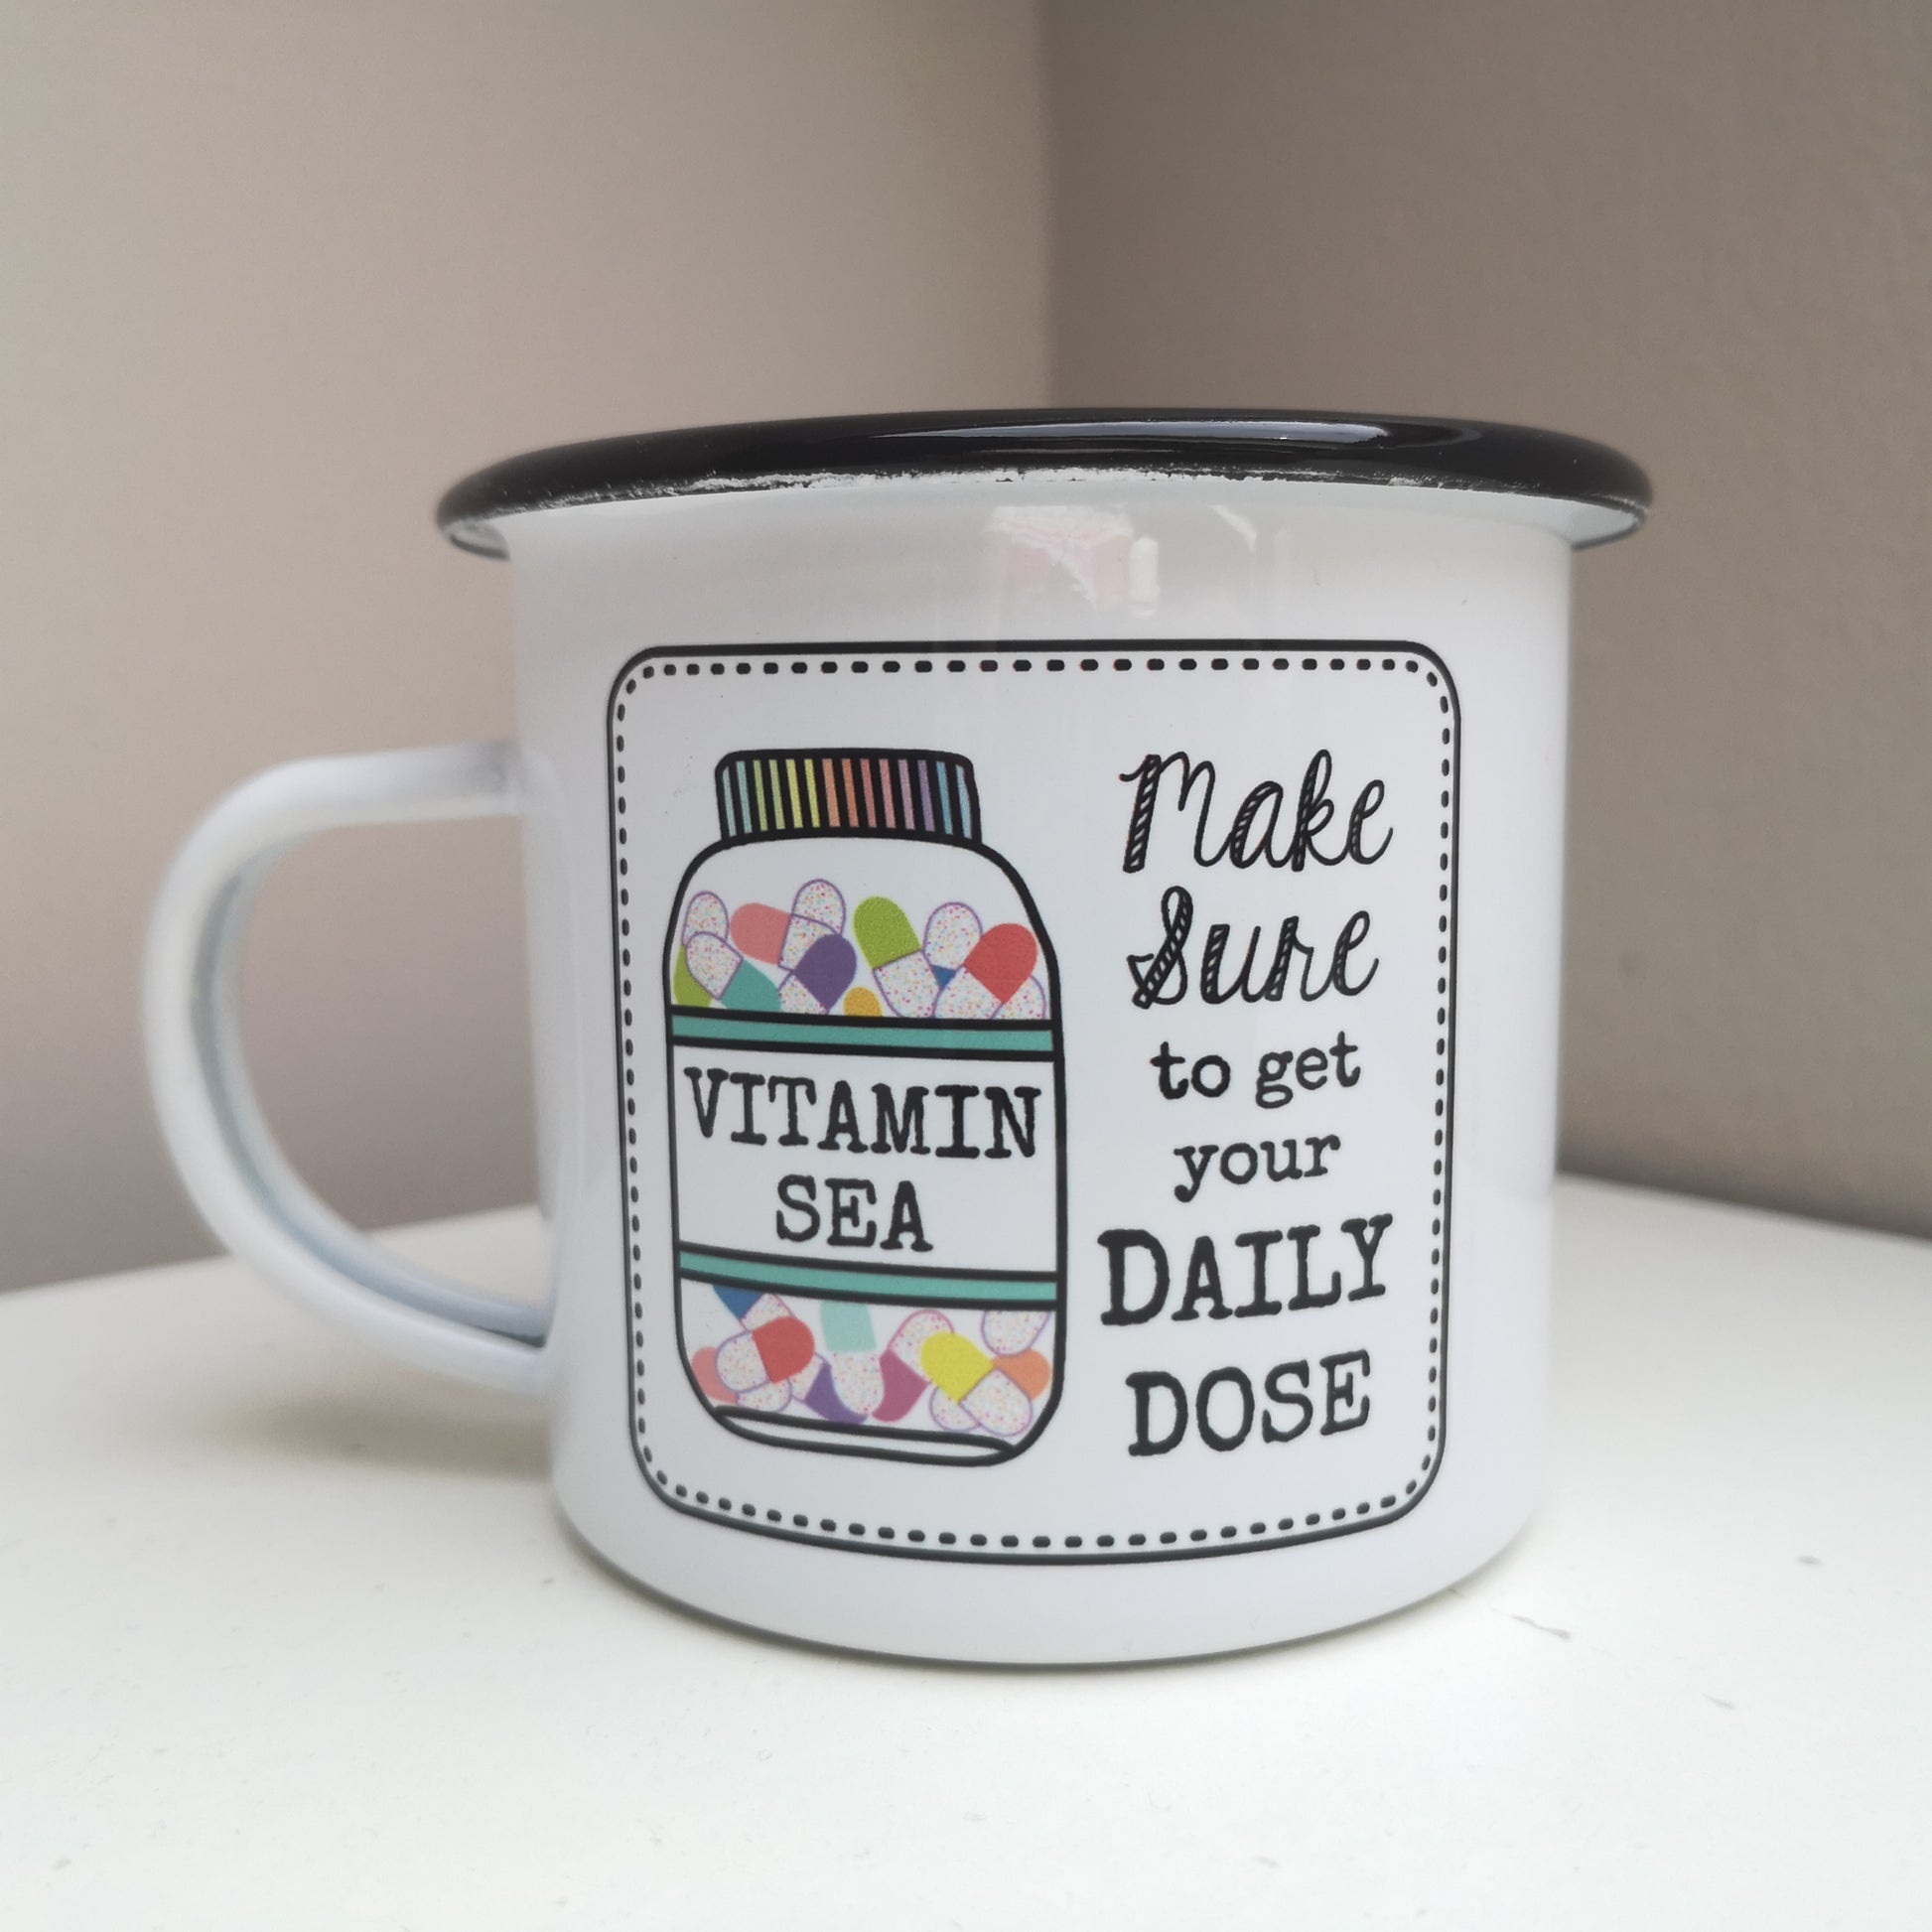 A White enamel mug with a black rim with the following on the front - a framed hand drawn image of a vitamin jar filled with brightly coloured pills and text to the right of it that says "make Sure to get your daily dose". The bottle has a VITAMIN SEA label on it.